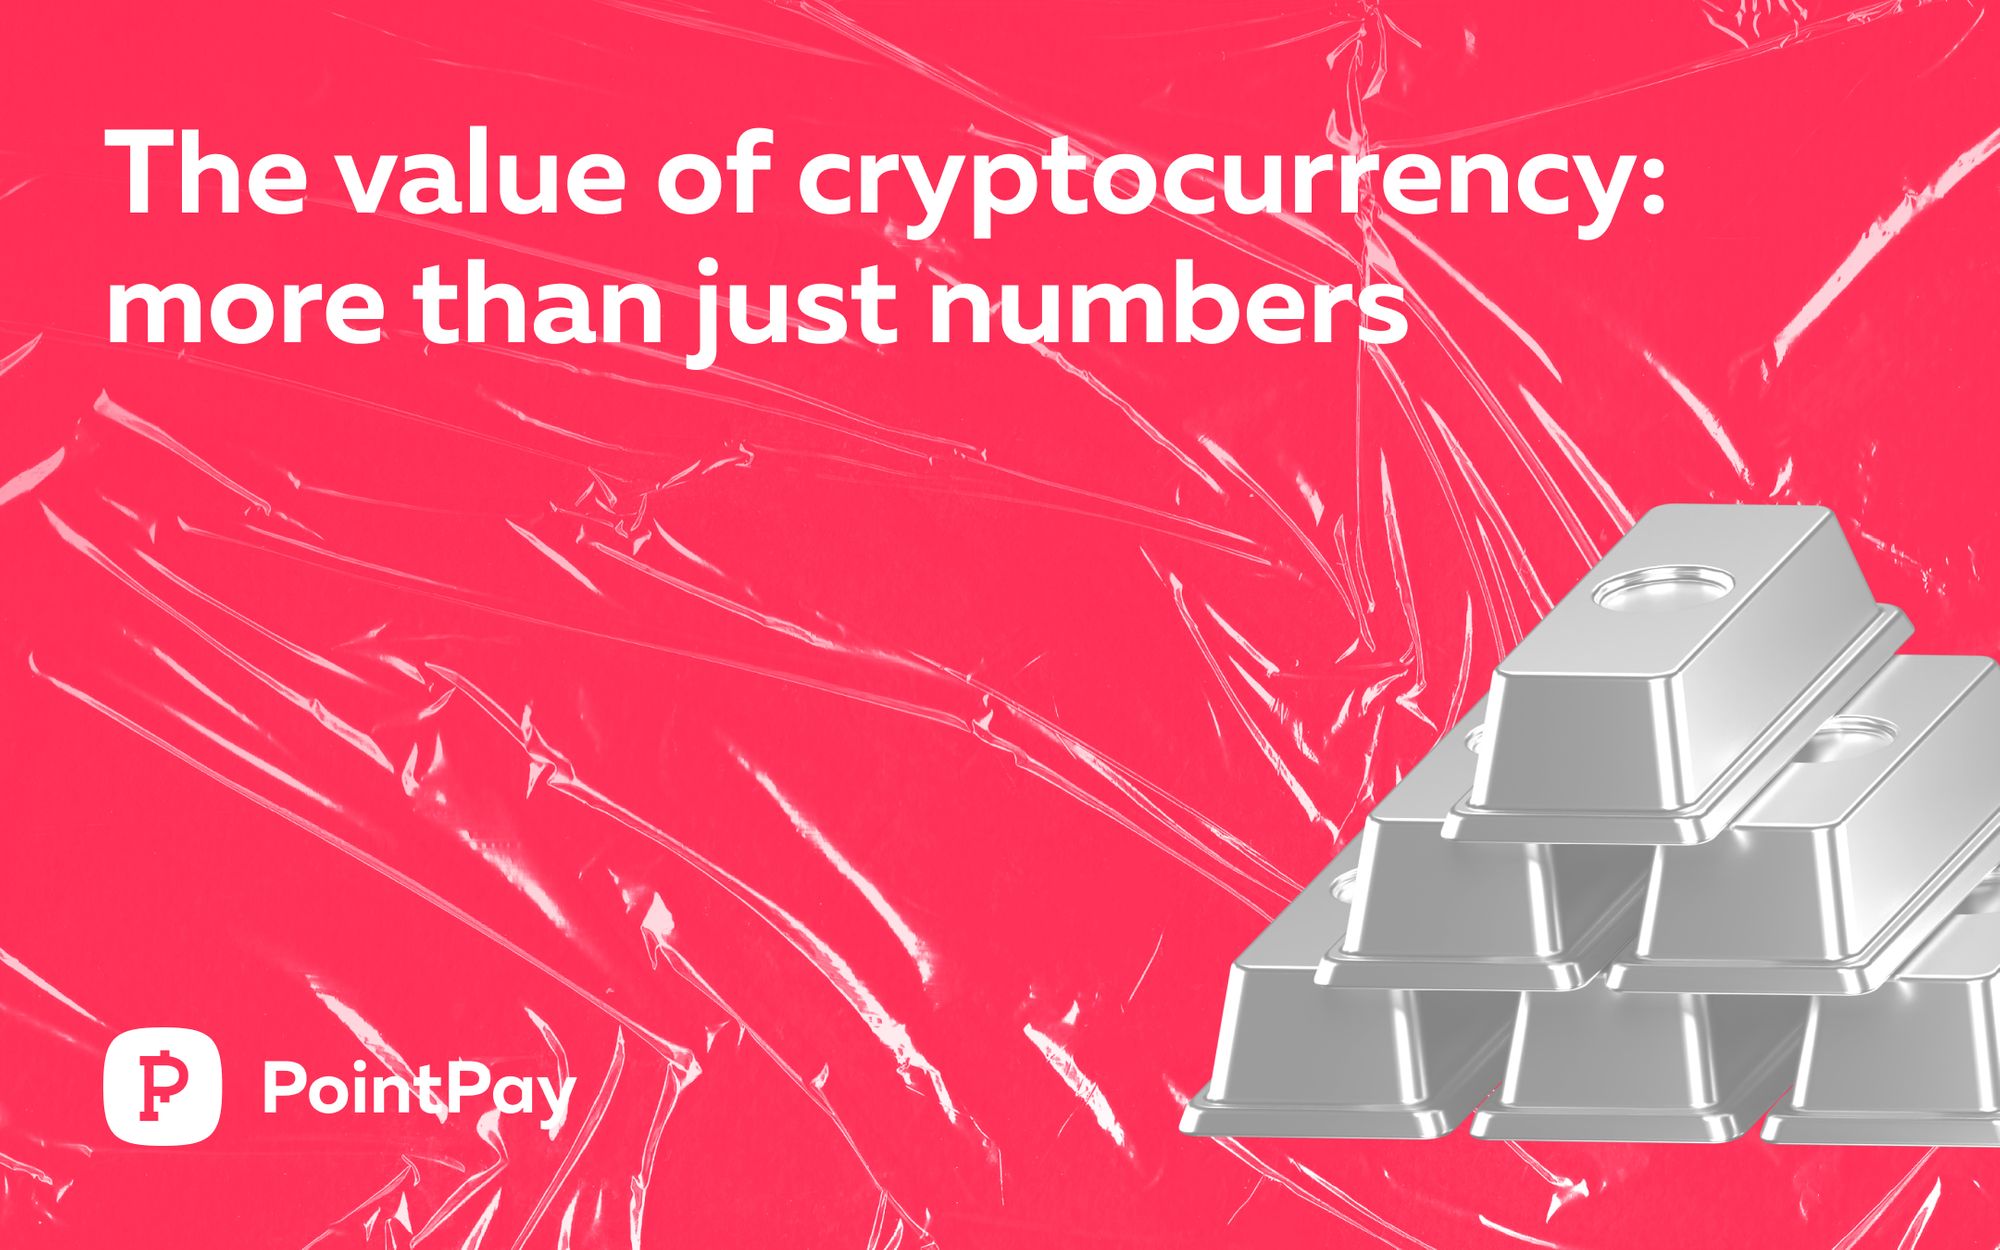 How do cryptocurrencies acquire their value?